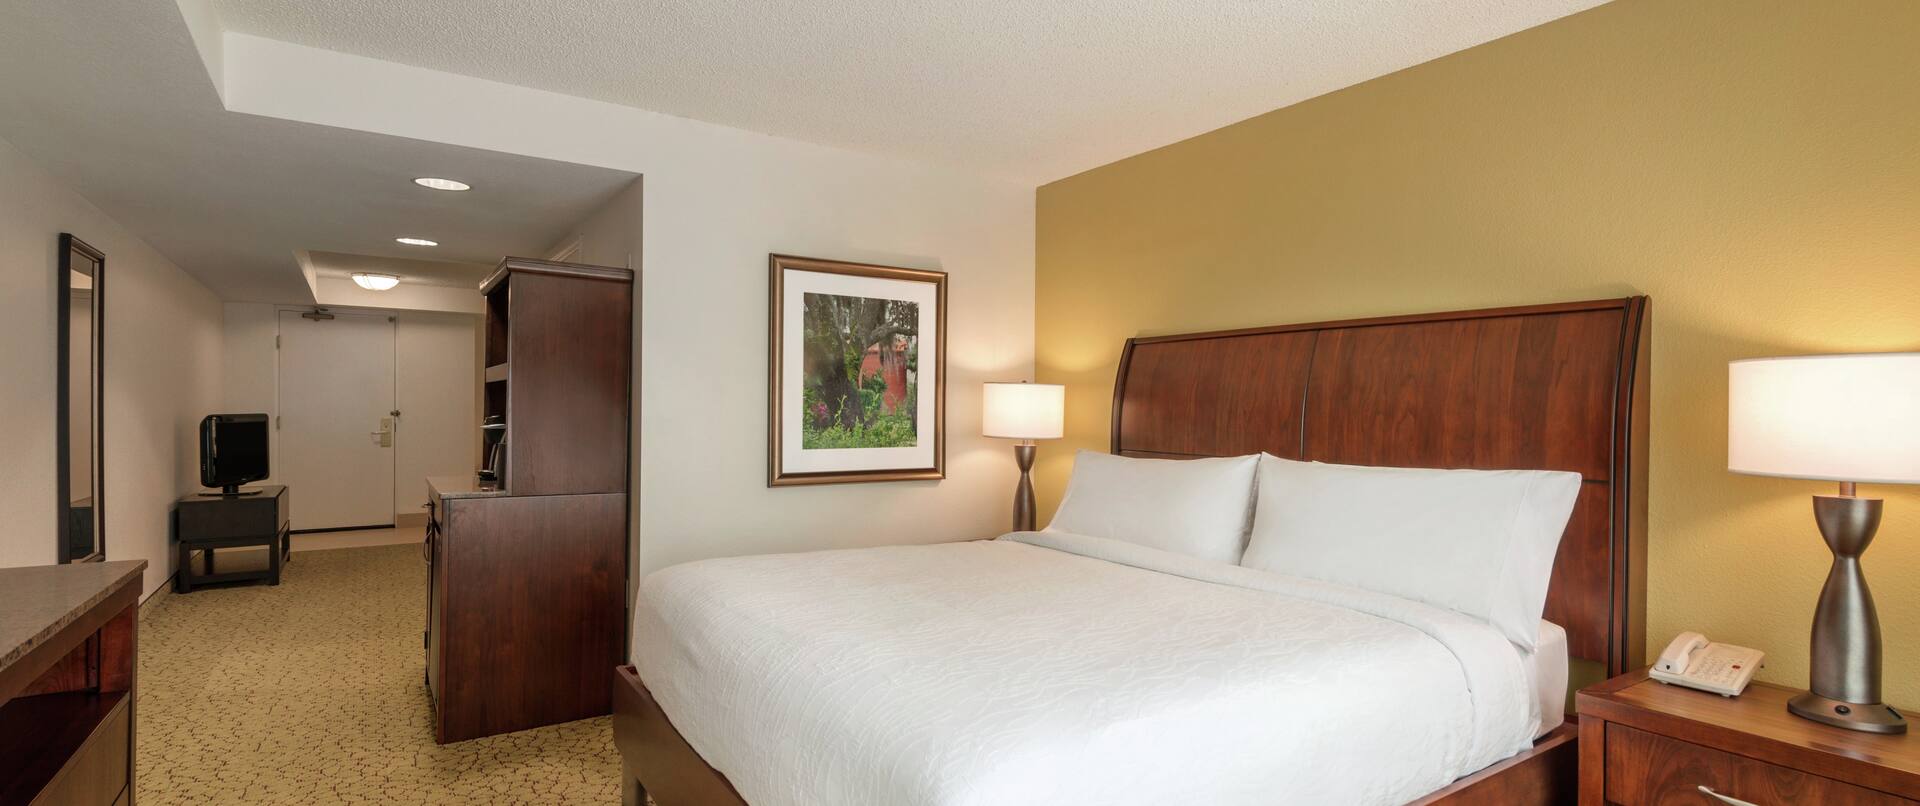 Guest Suite with King Bed, Television and Wet Bar